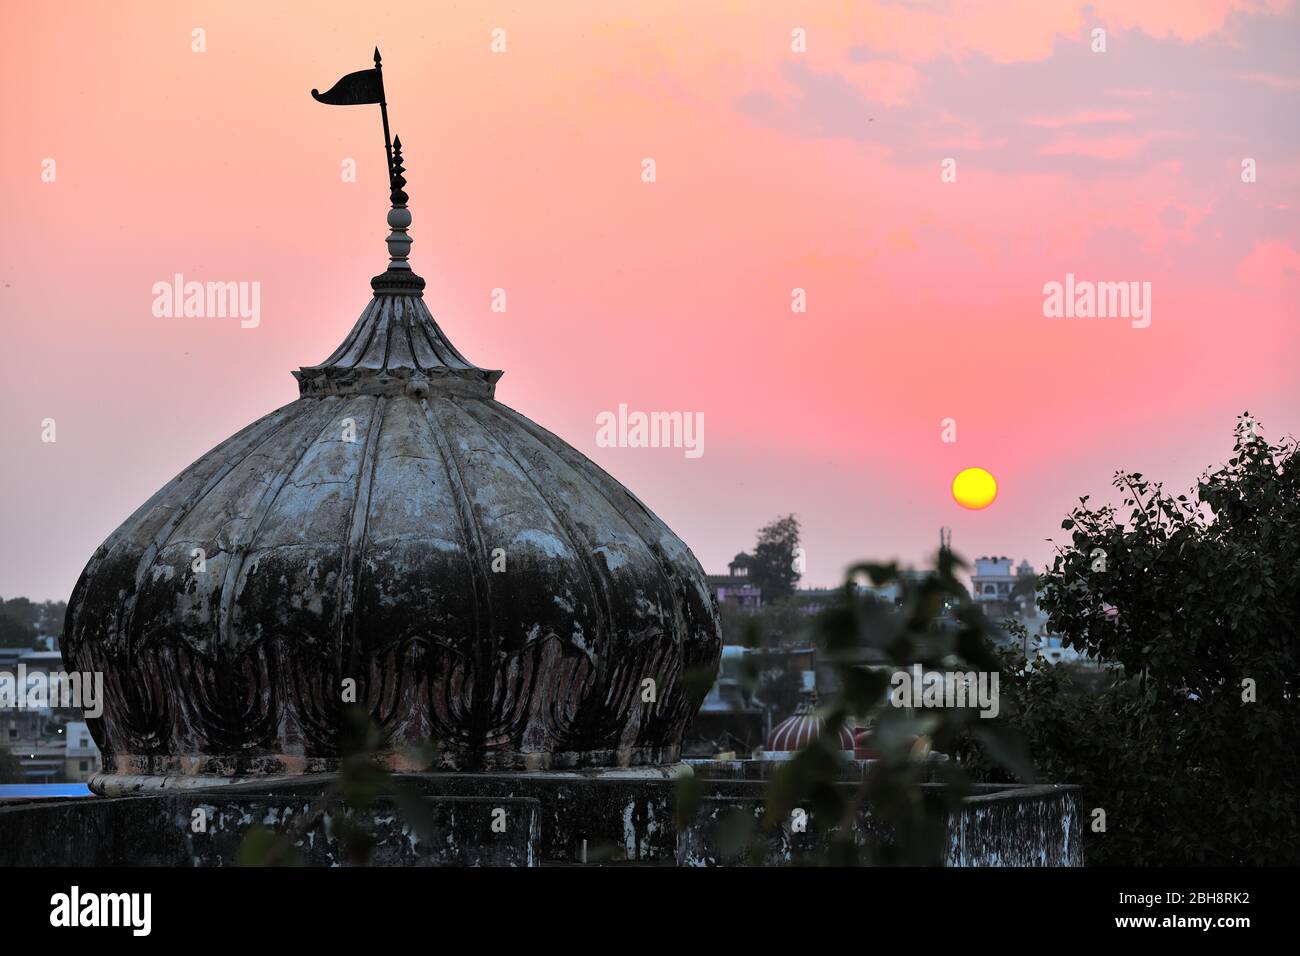 sunset over old architectural building in pushkar, ajmer, rajasthan, india Stock Photo